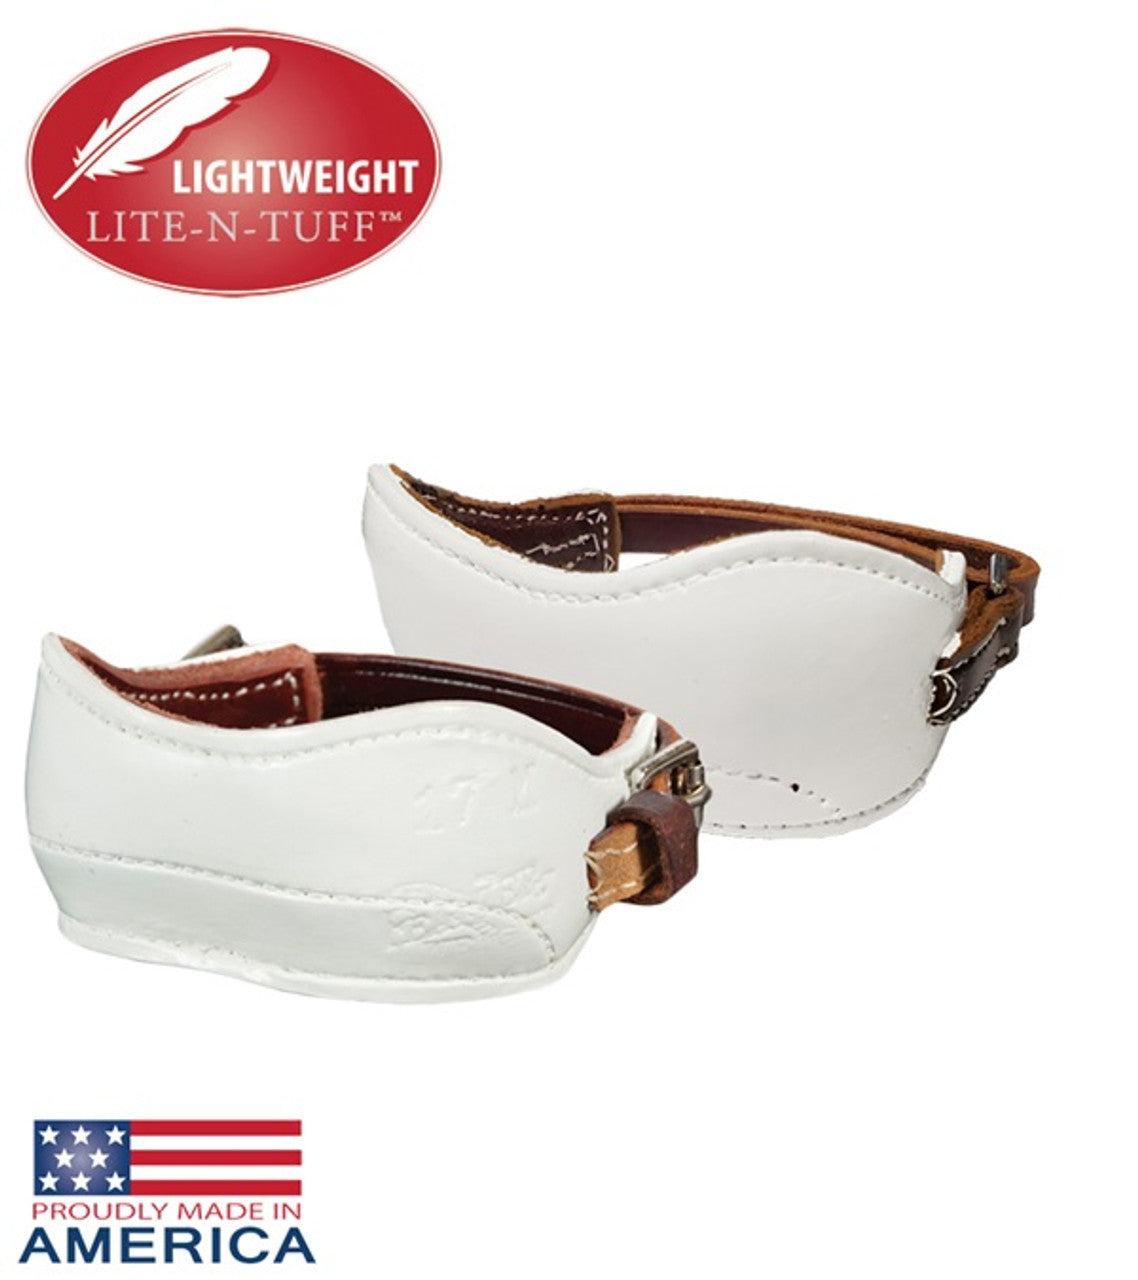 LITE-N-TUFF Feather-Weight Quarter or Grabbing Boots Weighted